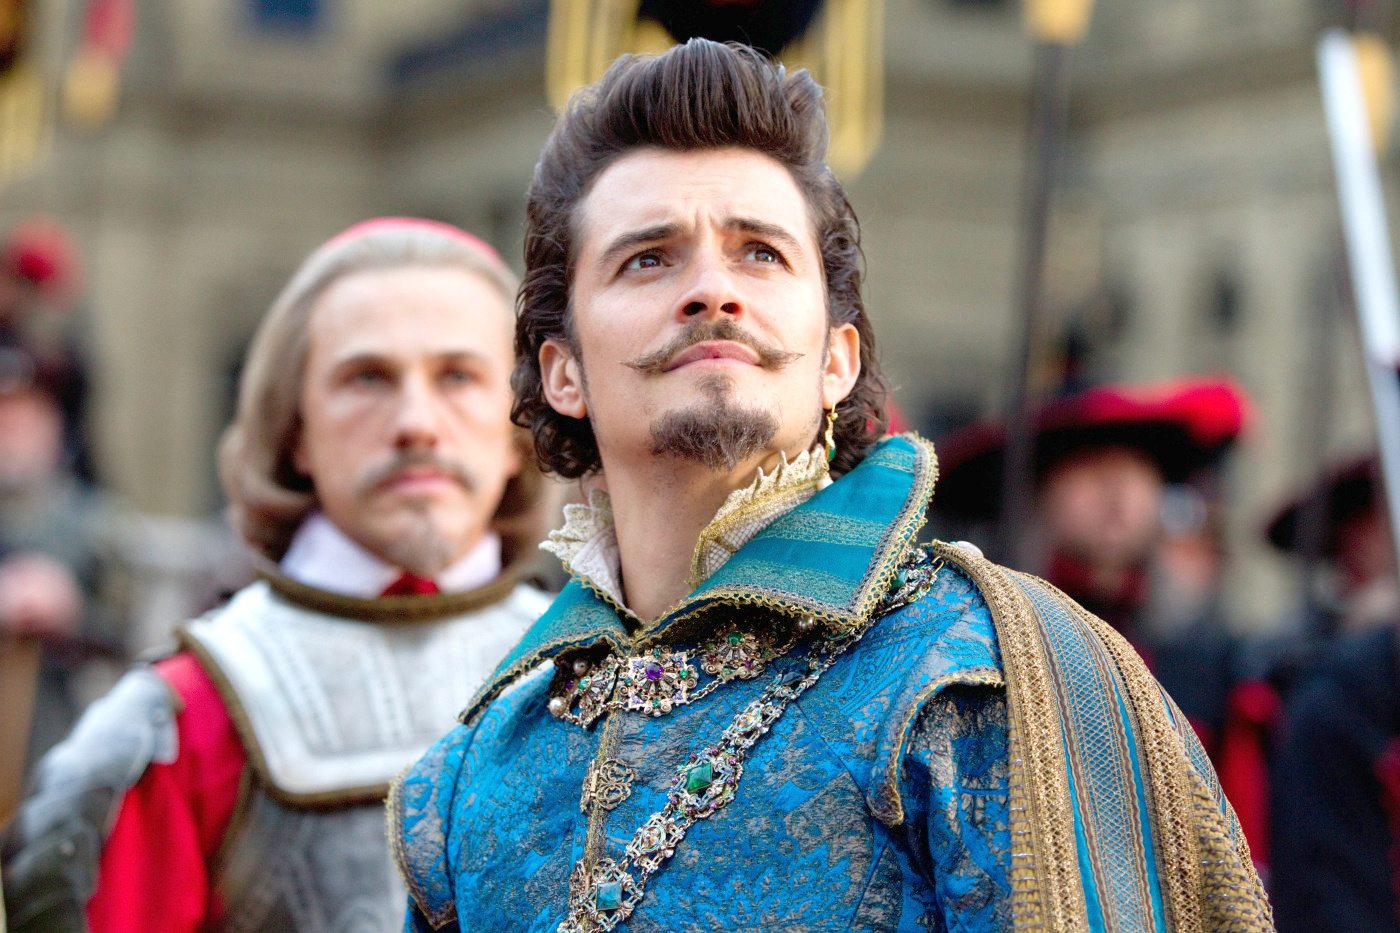 Orlando Bloom in The Three Musketeers